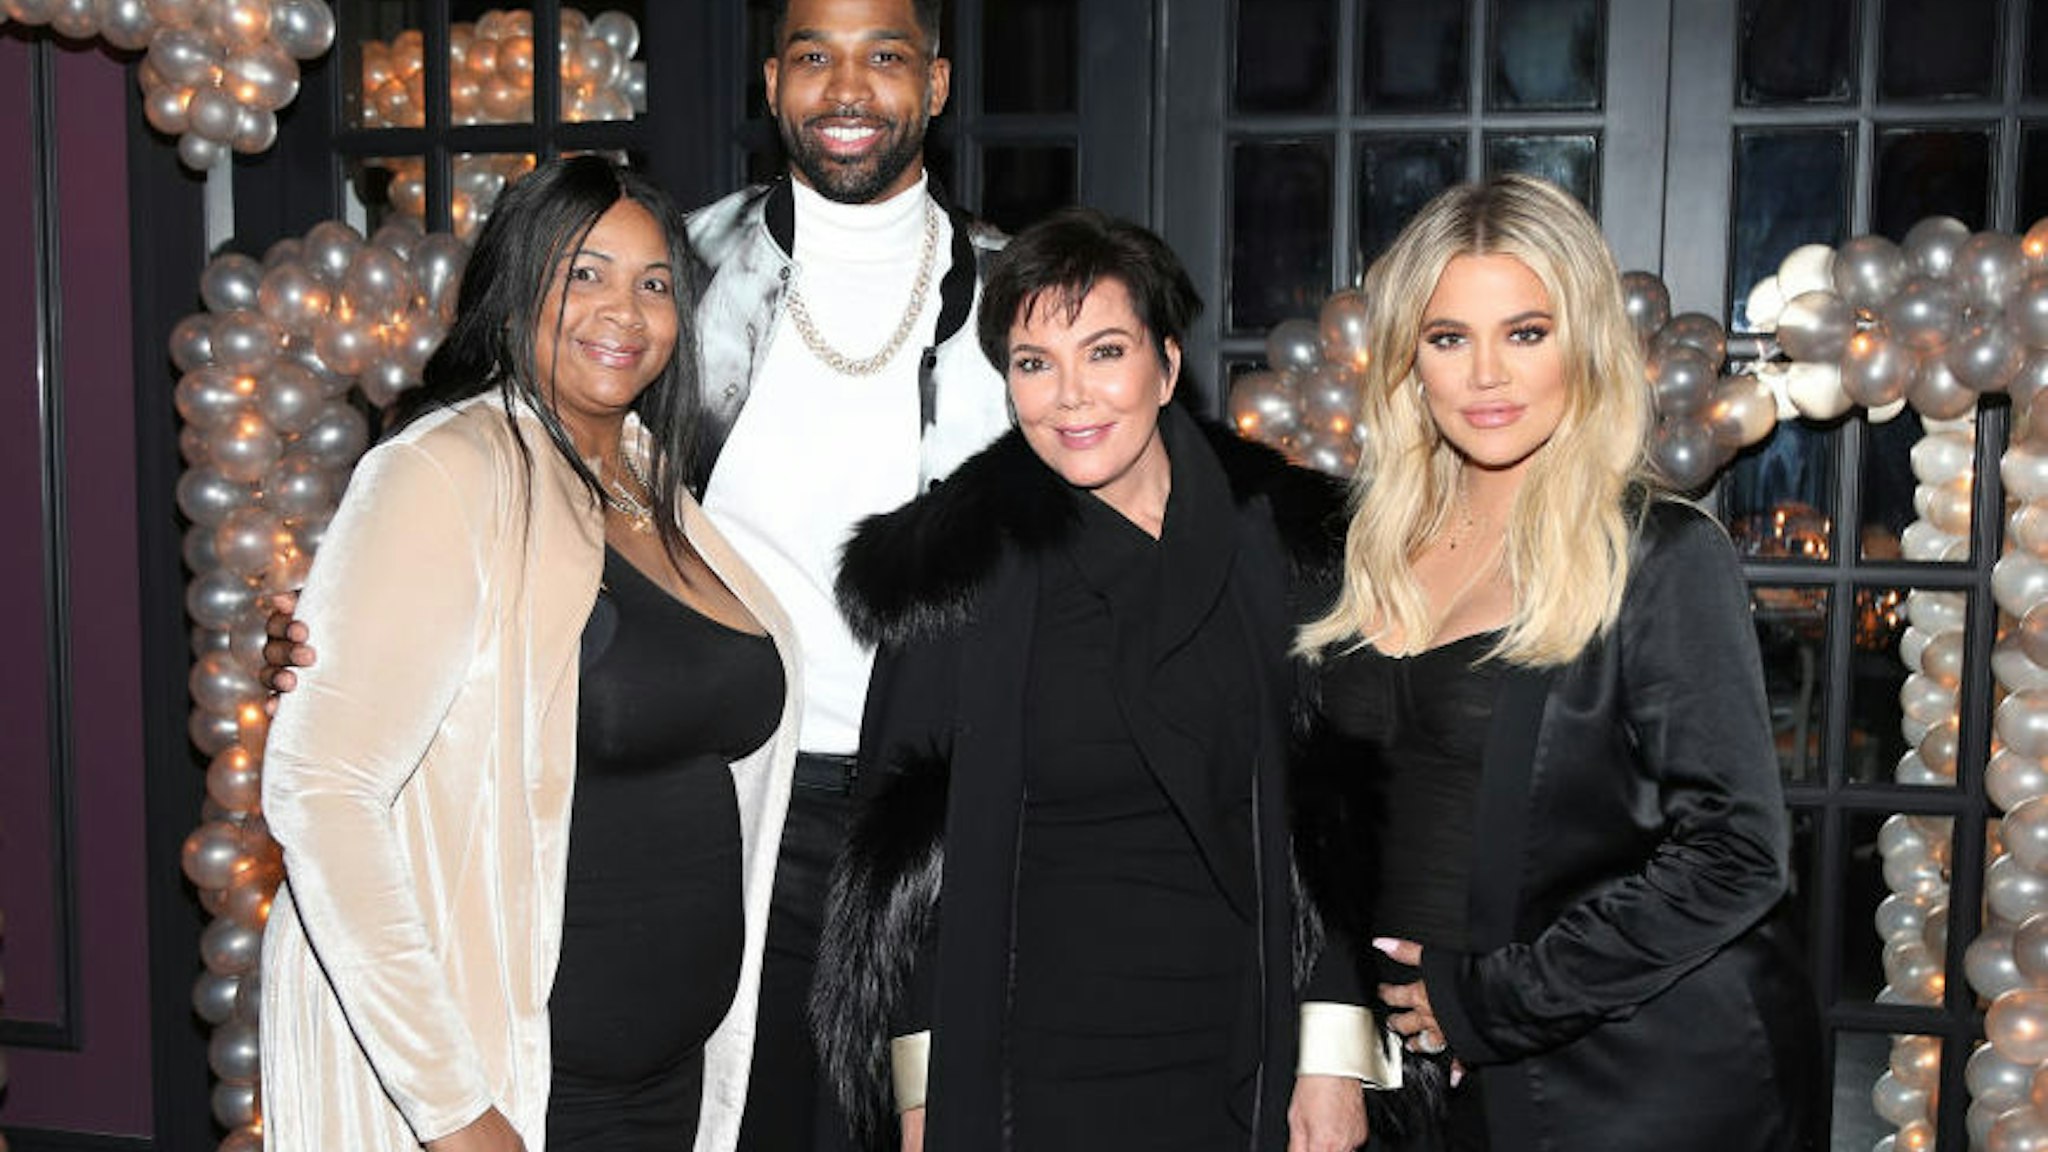 Andrea Thompson, Tristan Thompson, Kris Jenner and Khloe Kardashian pose for a photo as Remy Martin celebrates Tristan Thompson's Birthday at Beauty & Essex on March 10, 2018 in Los Angeles, California.